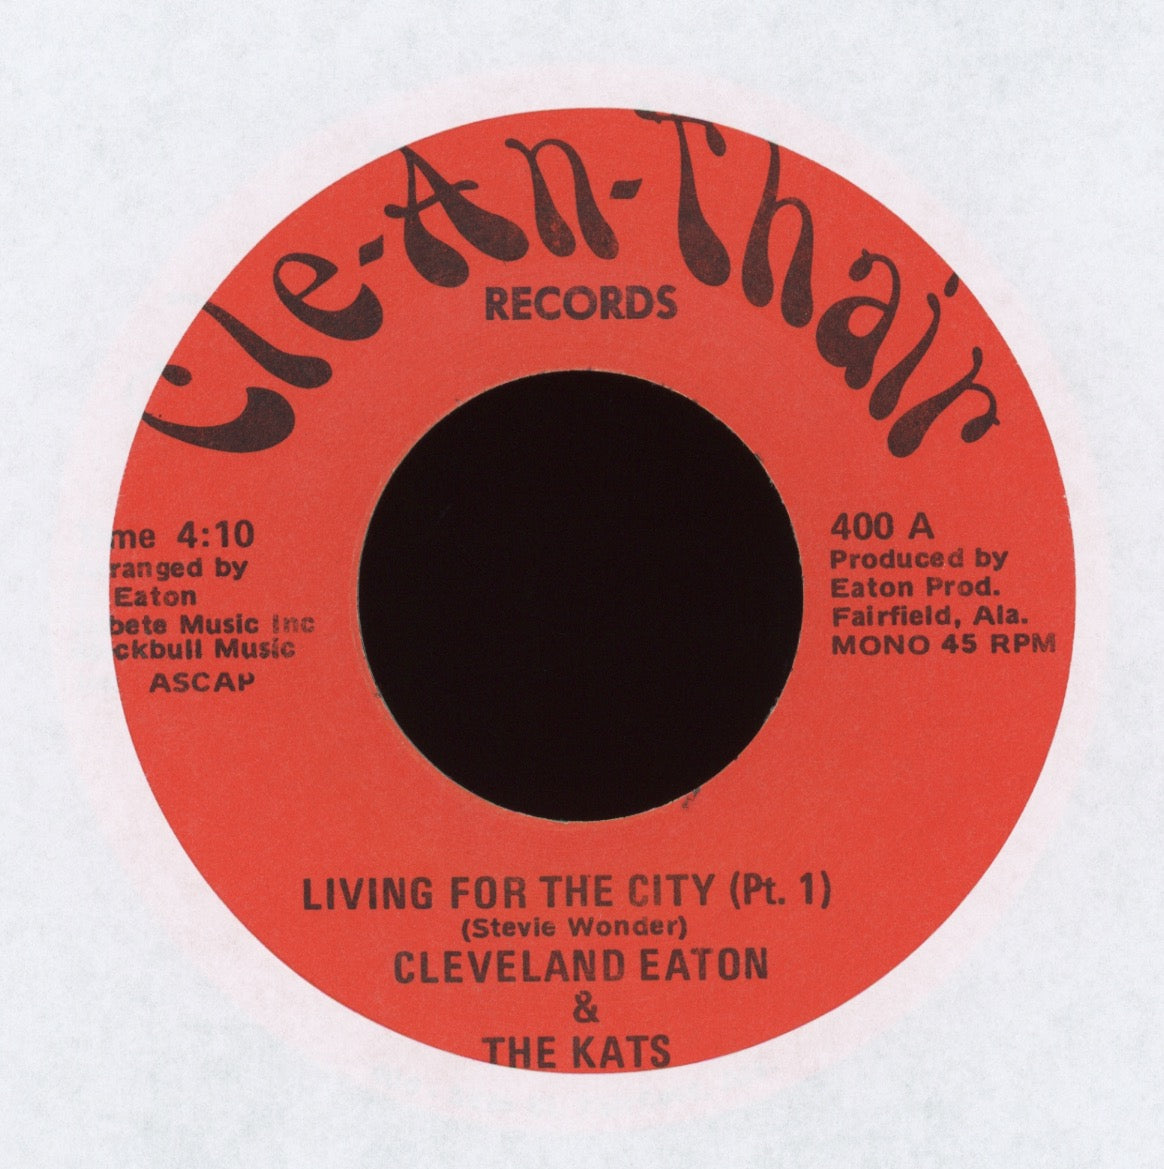 Cleveland Eaton & The Kats - Living For The City Pt1 on Cle-An-Thair